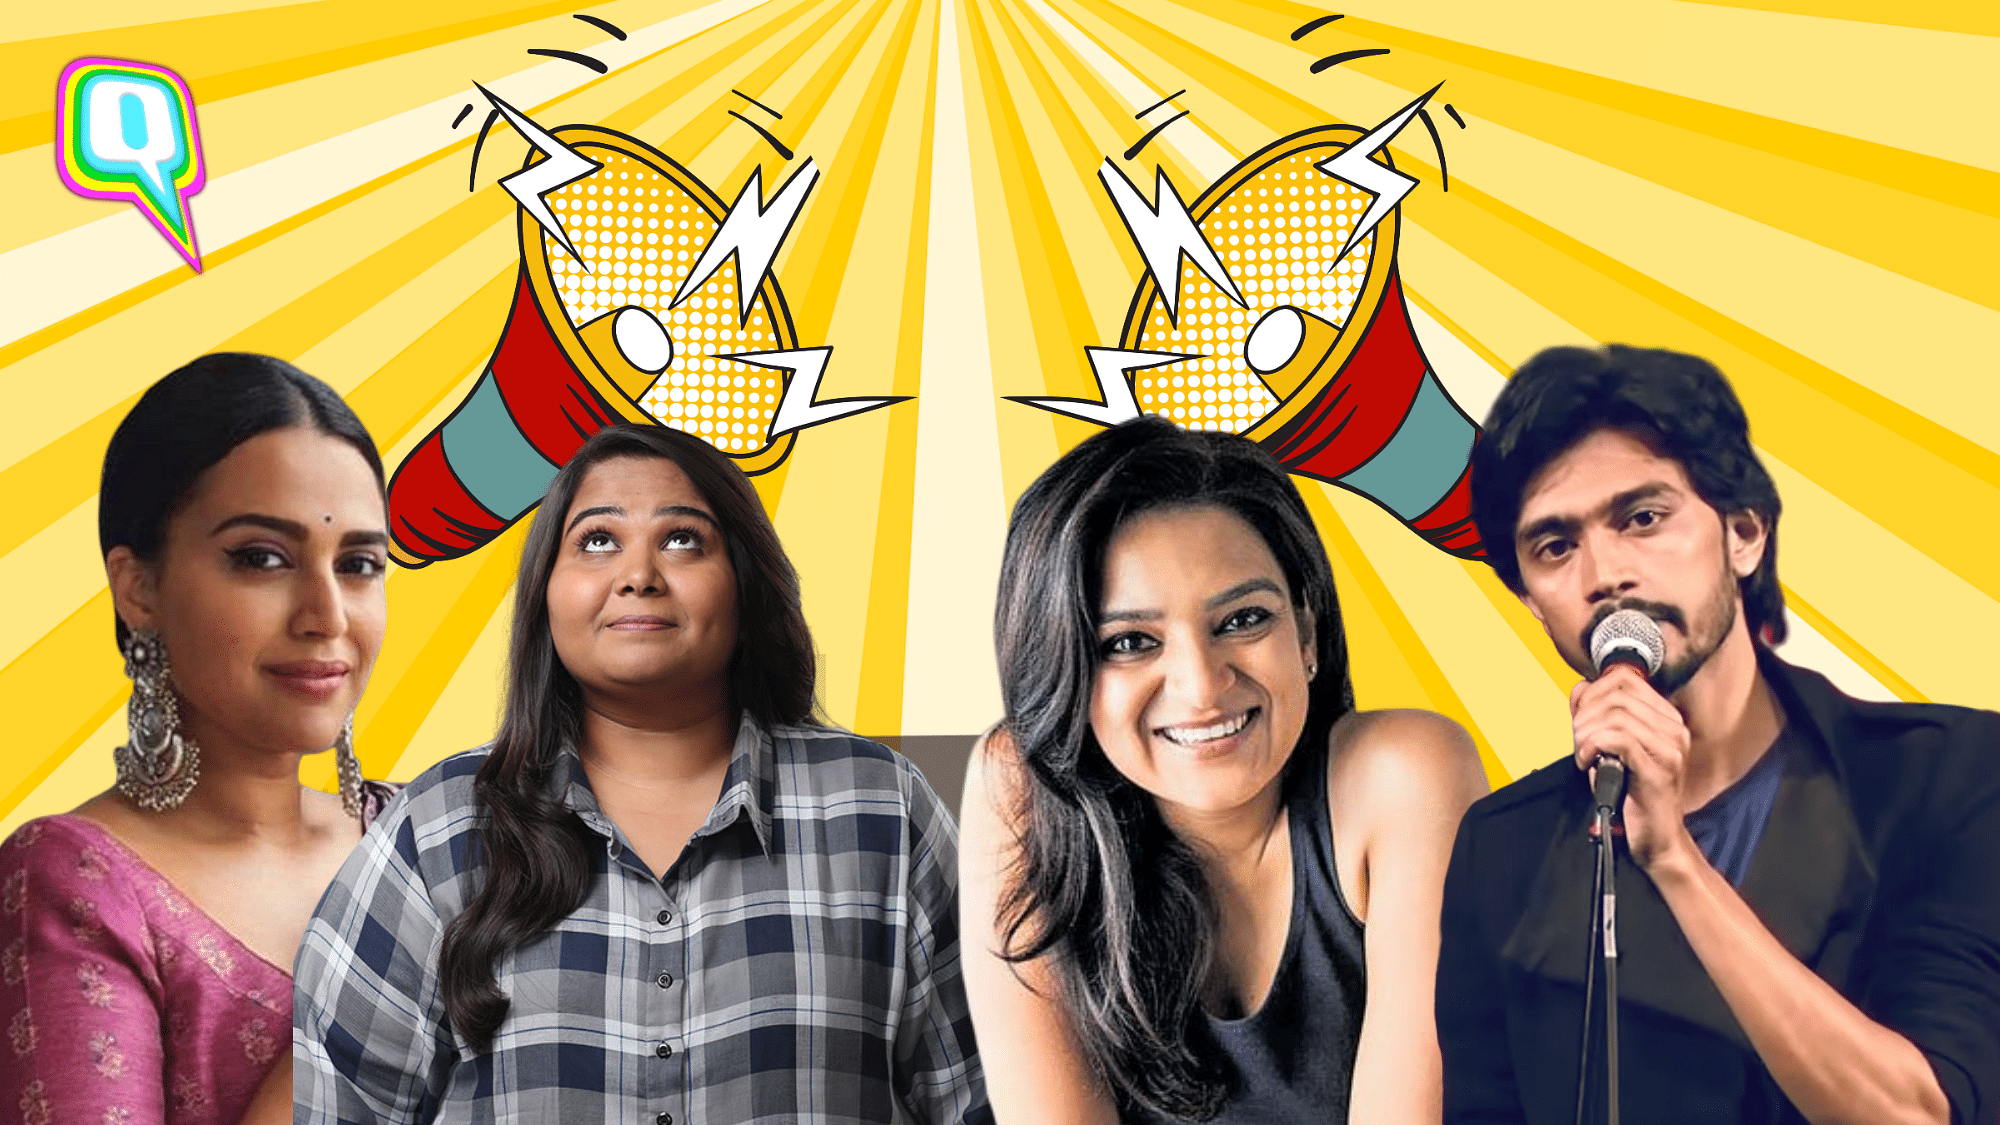 Artists react to the propaganda being spread against anti-CAA protesters. Featuring Swara Bhasker, Aamir Aziz, Sumukhi Suresh, Kaneez Surka and more!